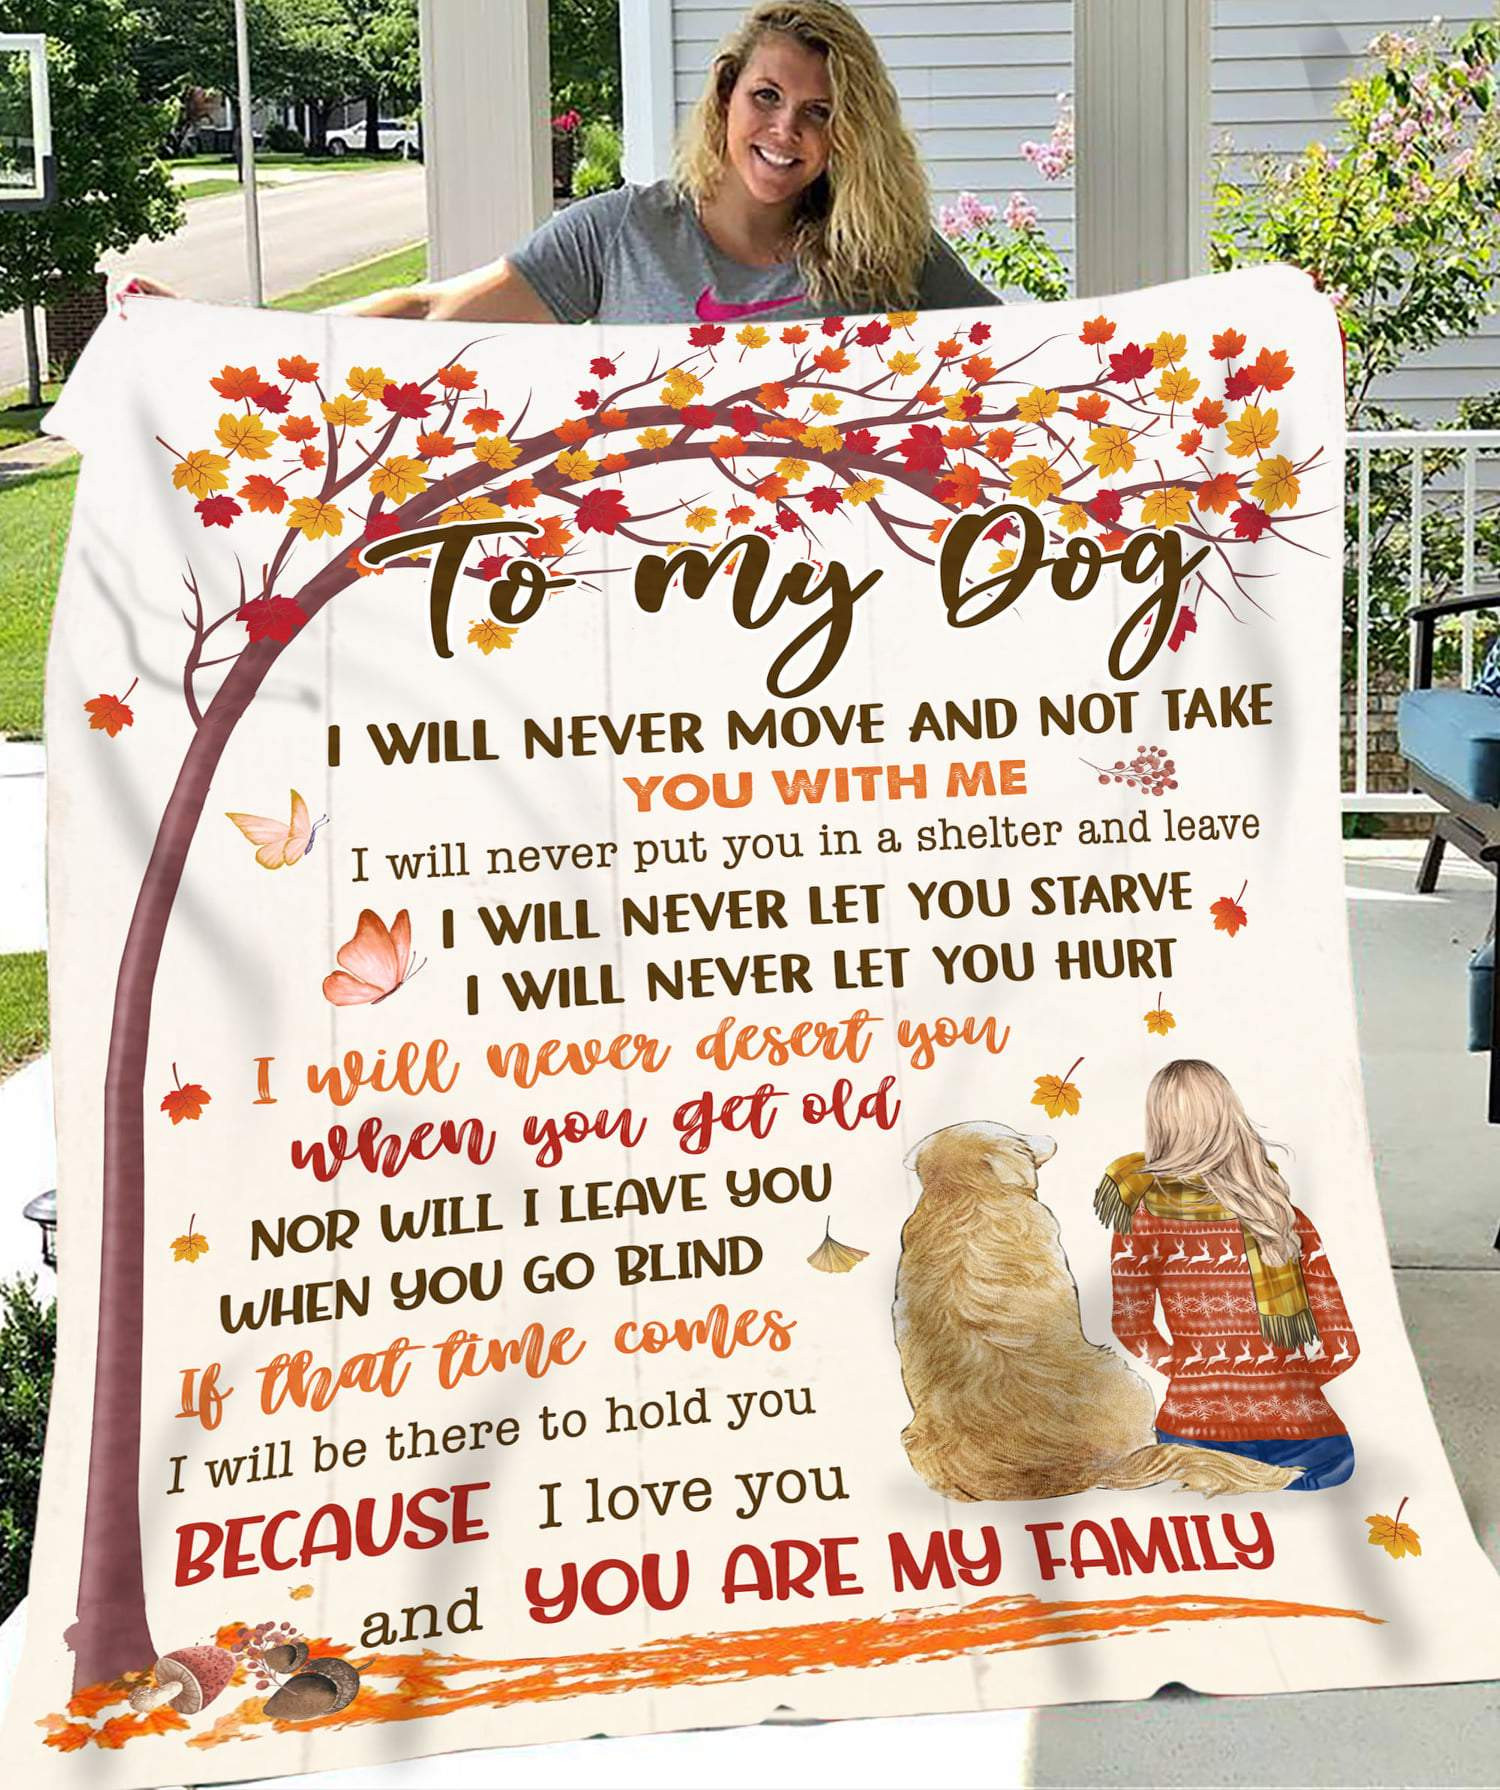 To My Dog I Will Never Move And Not Take You With Me, Because I Love You And You Are My Family Fleece Blanket